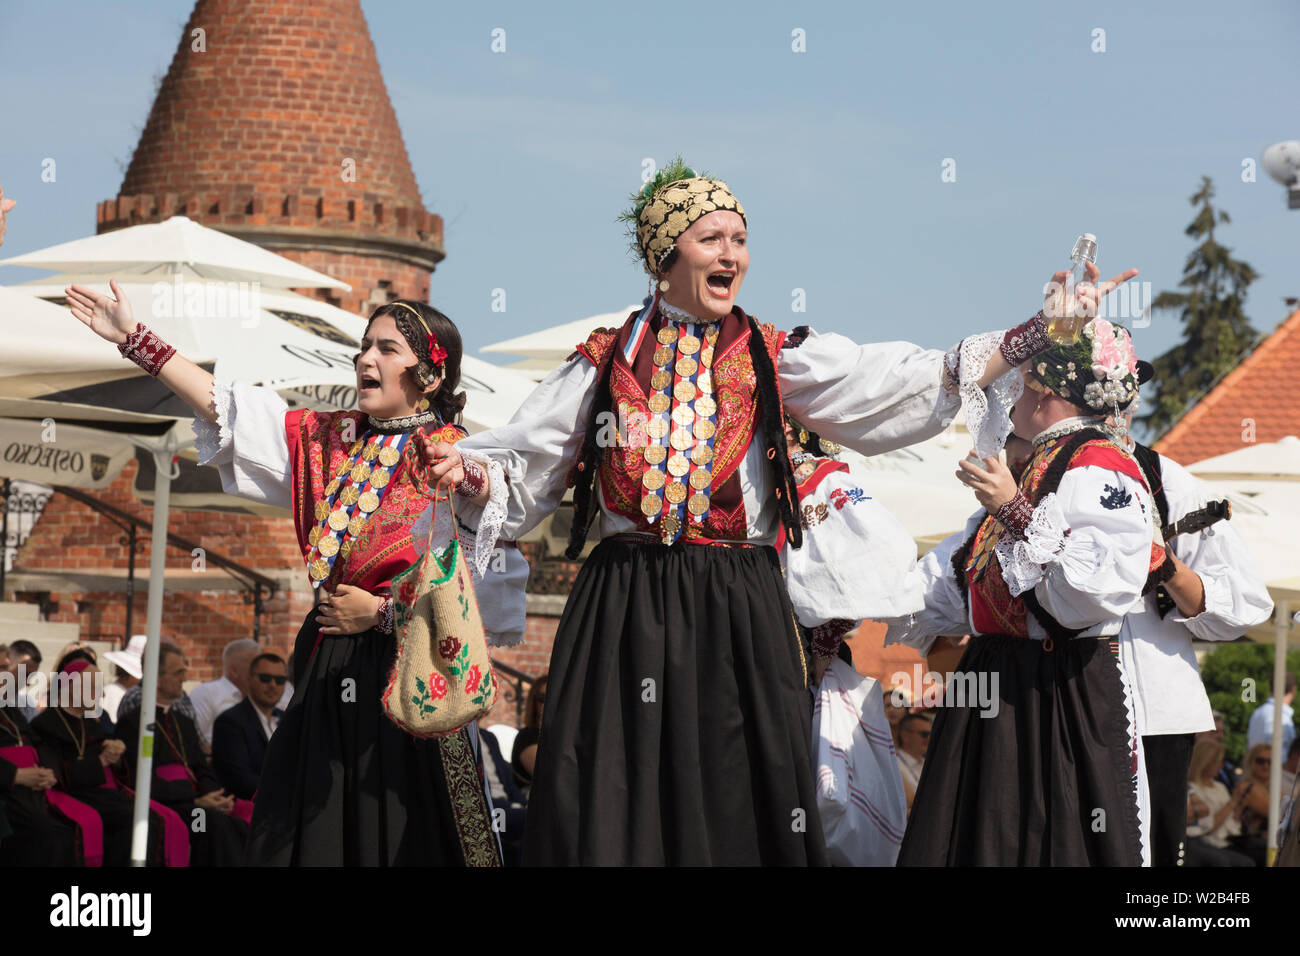 Dakovo, Croatia. 7th July, 2019. People in traditional costumes perform during the 53rd Dakovacki vezovi festival in Dakovo, Croatia, on July 7, 2019. Dakovacki vezovi festival, one of the major cultural events in Croatia, presents traditional costumes and performances. Credit: Dubravka Petric/Xinhua/Alamy Live News Stock Photo